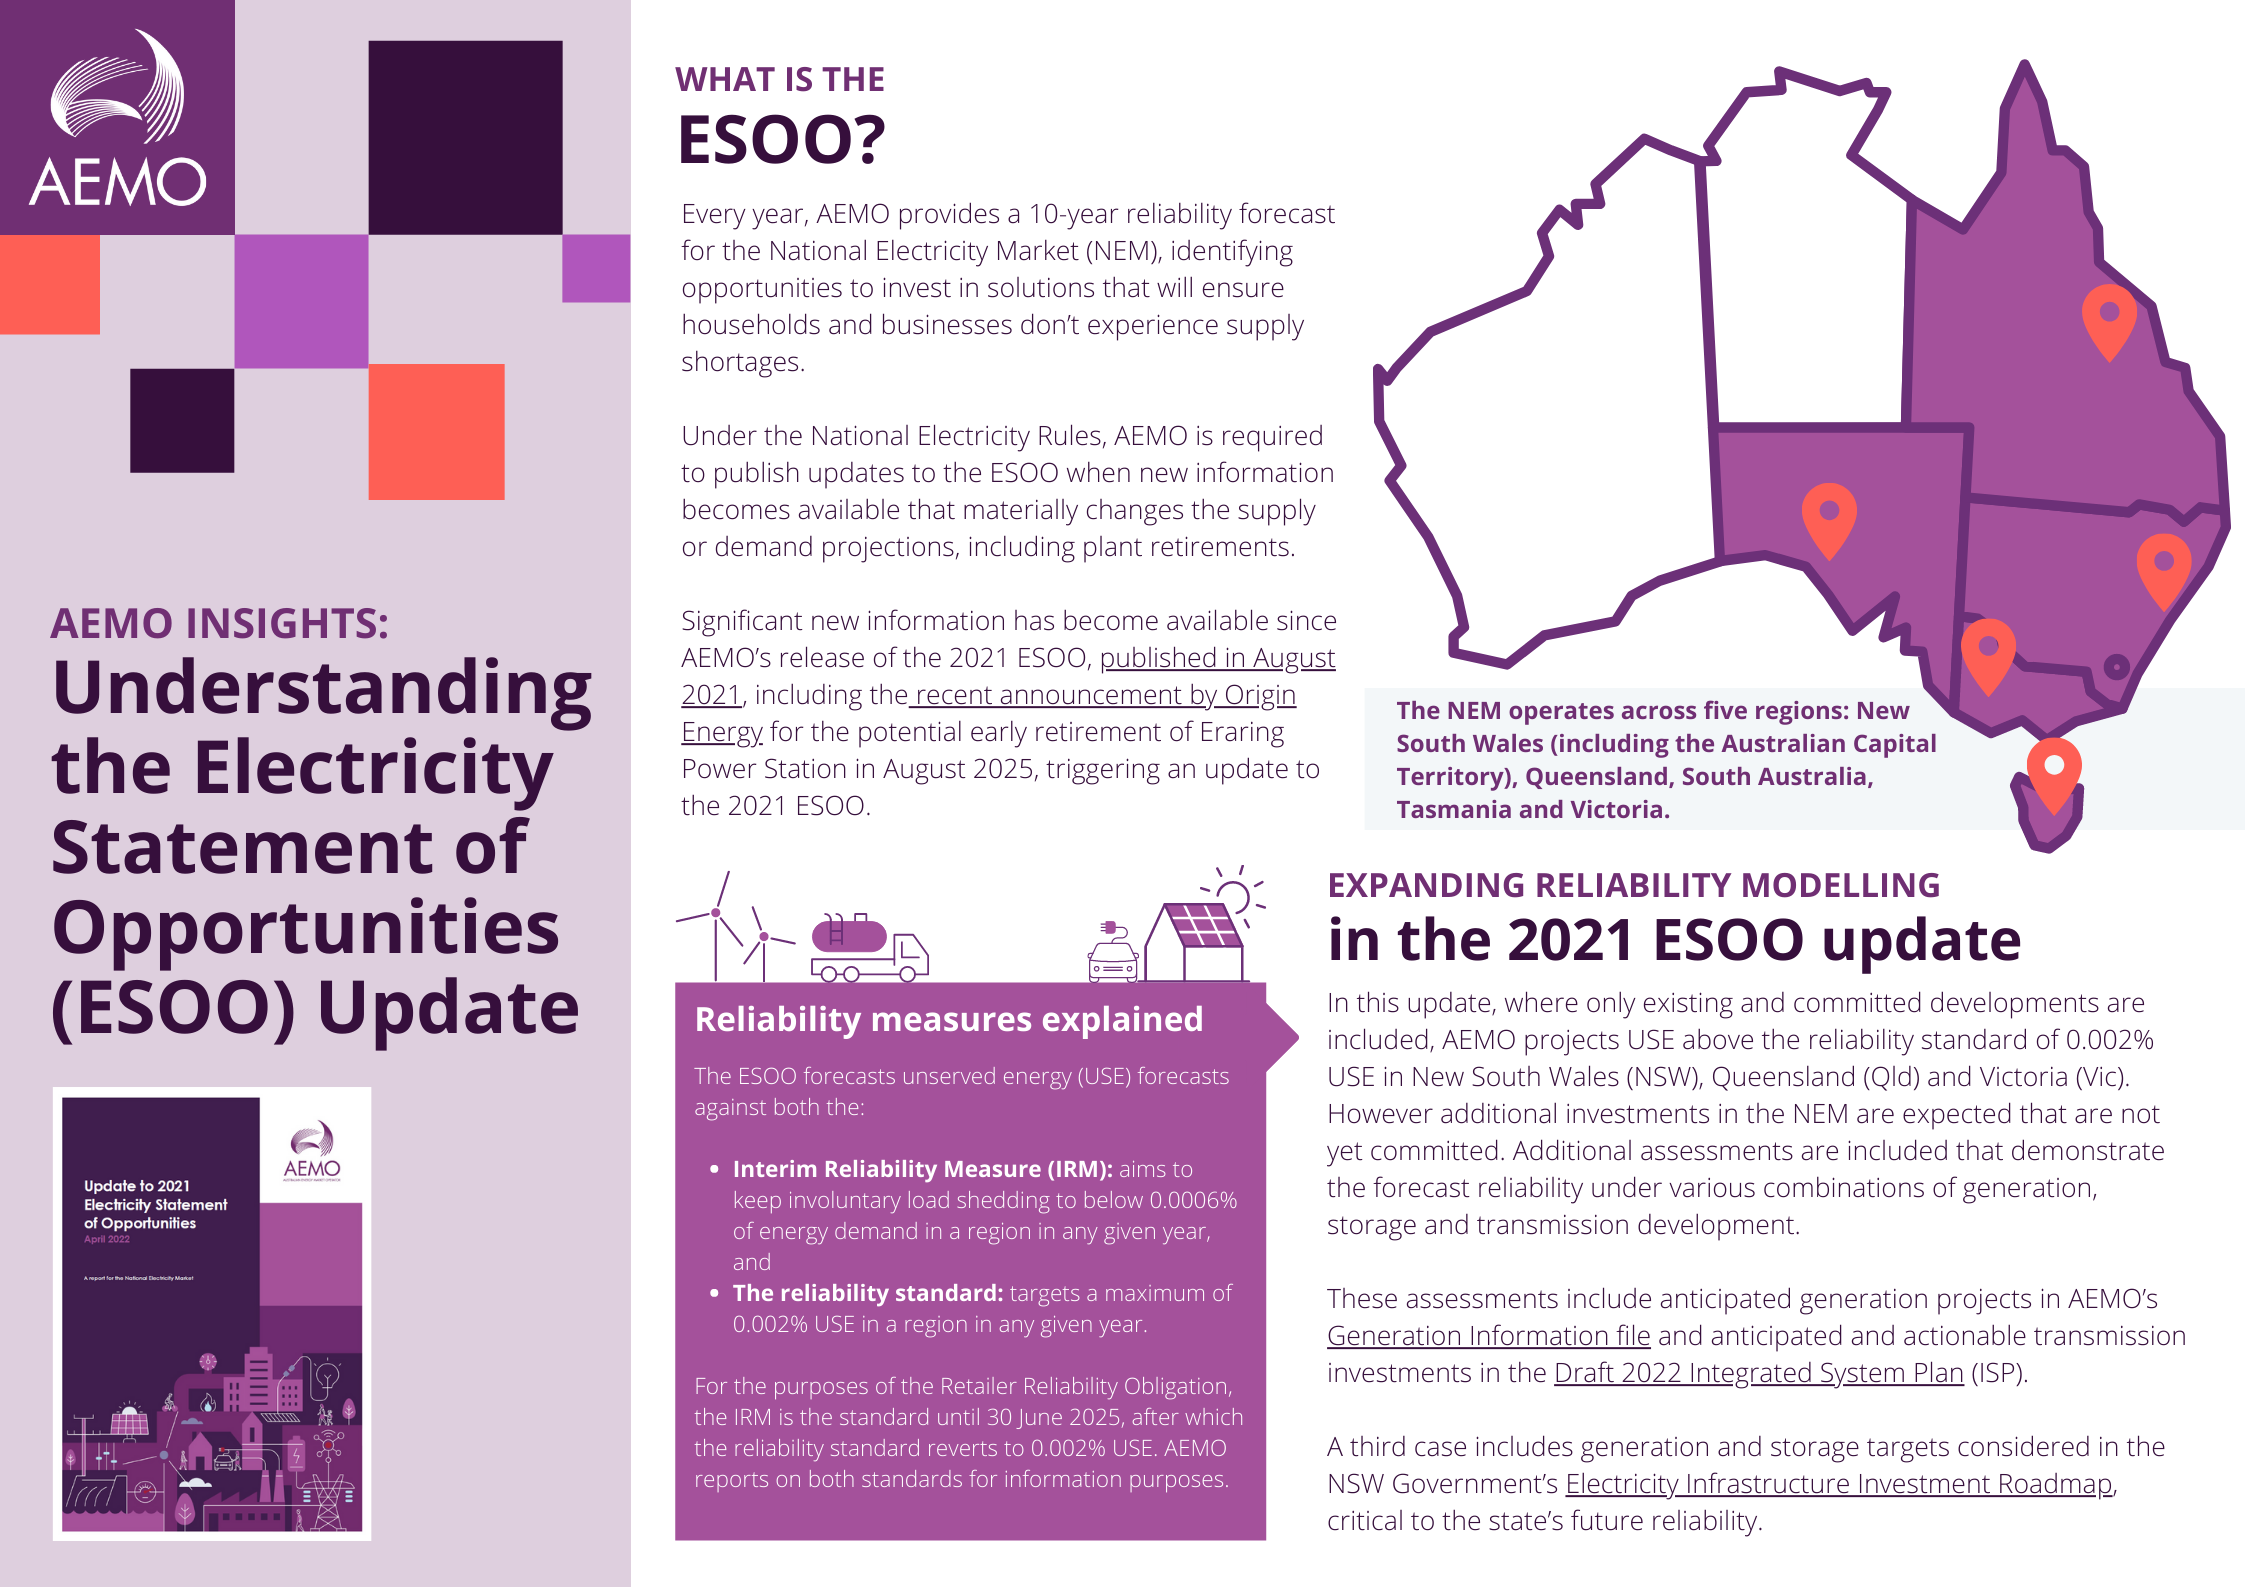 The first part of an Infographic for an April 2022 update to the 2021 Electricity Statement of Opportunity for the NEM